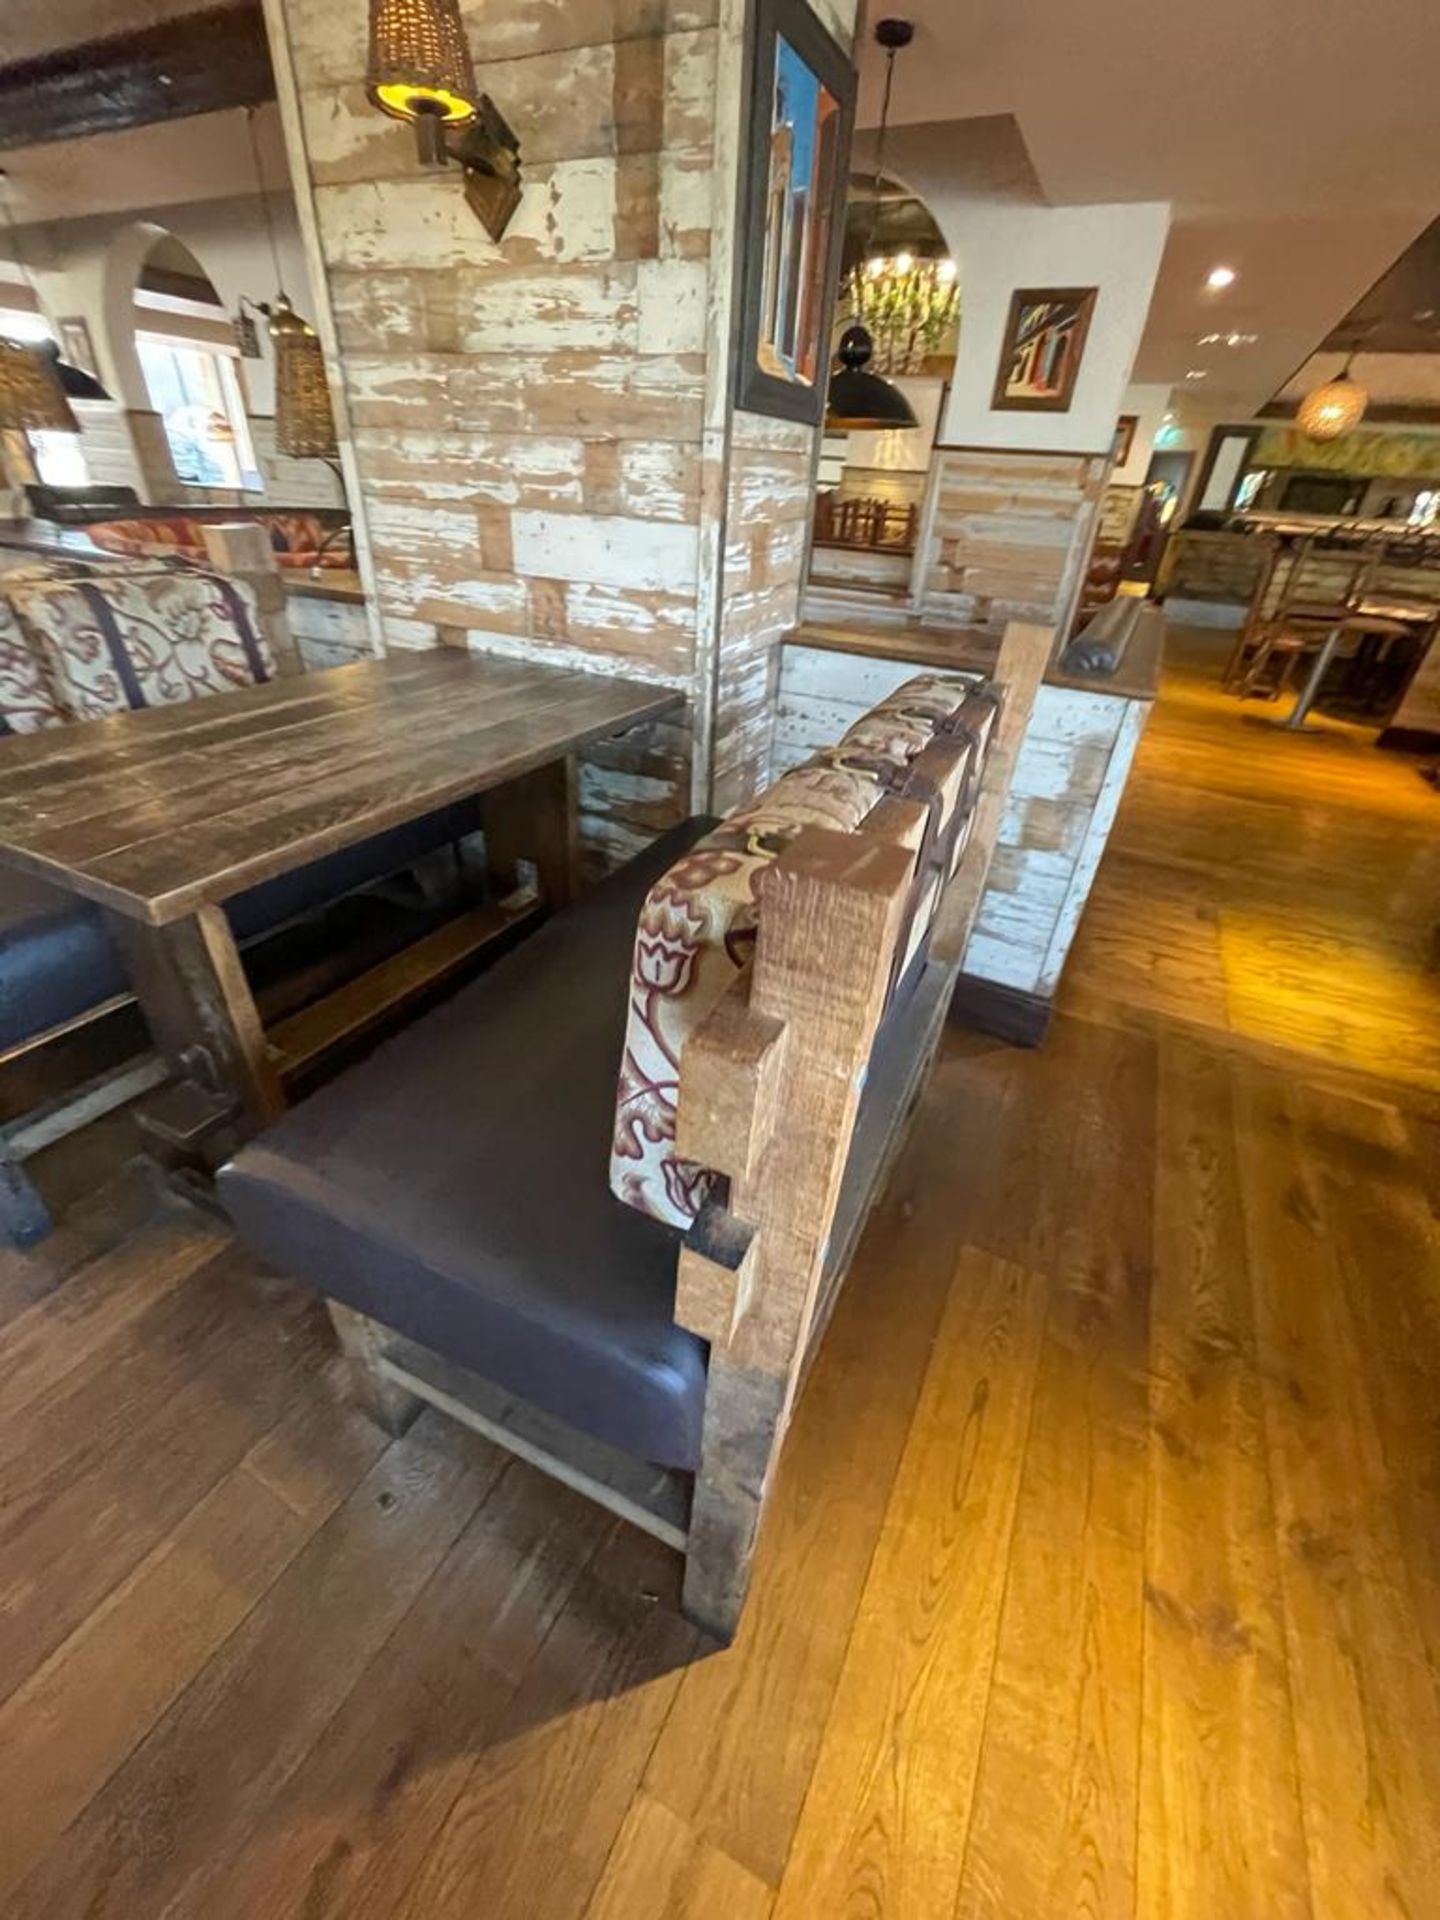 2 x Rustic Seating Benches Featuring Timber Frames, Brown Faux Leather Seat Pads and Floral Fabric - Image 10 of 13